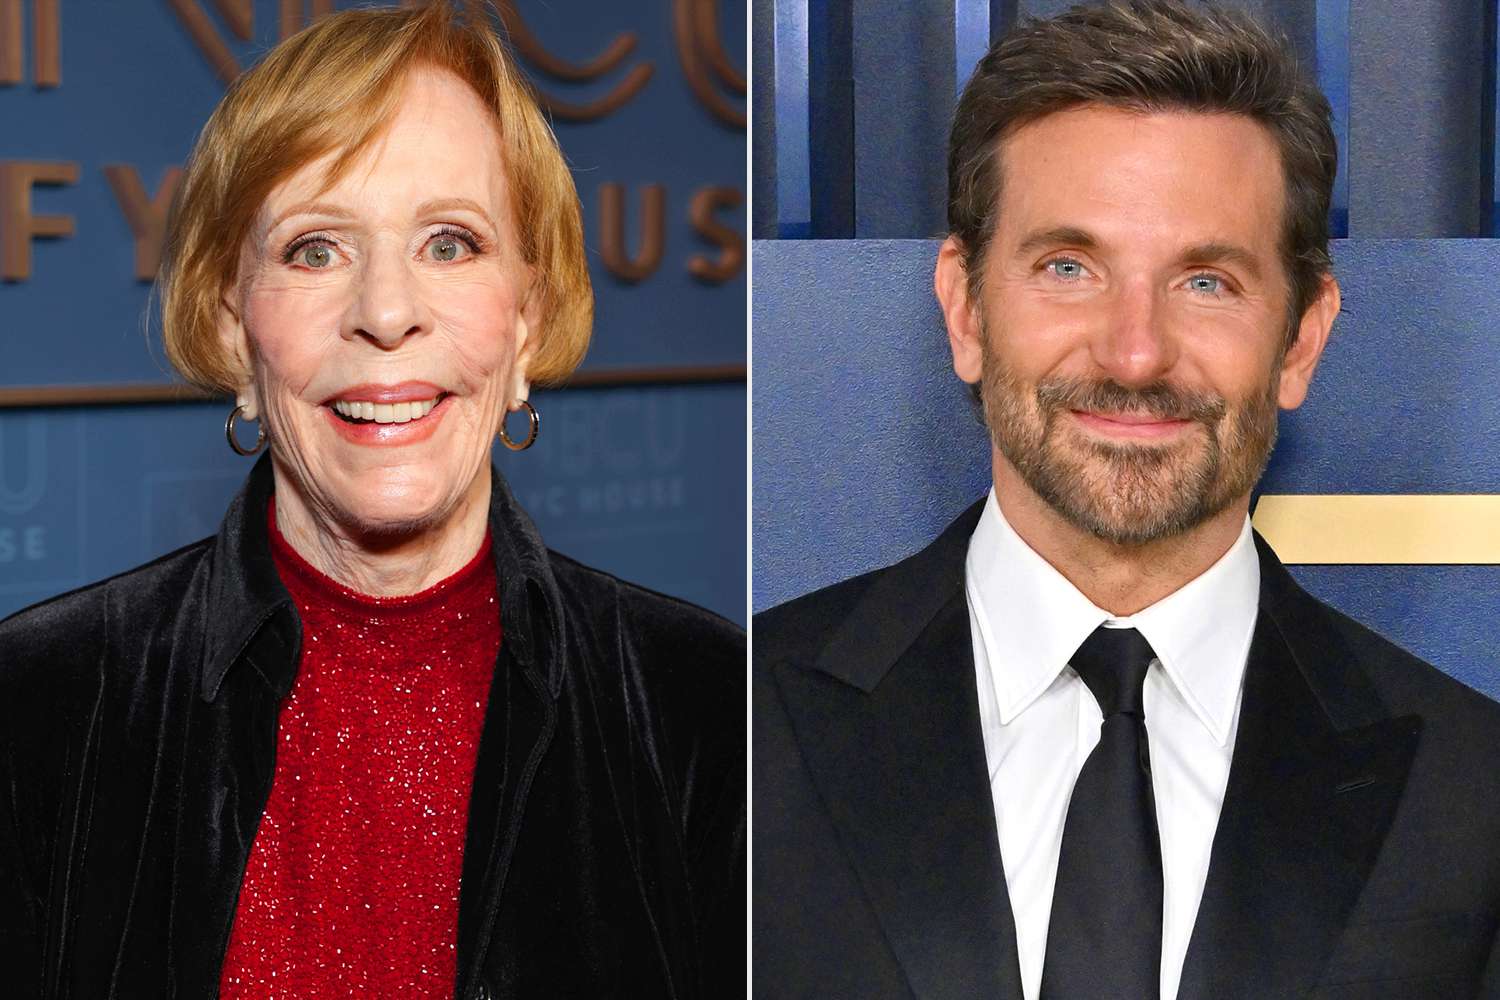 Bradley Cooper Surprises Carol Burnett with Sweet Message After She Joked She Wanted to 'Do' Him for Her 91st Birthday